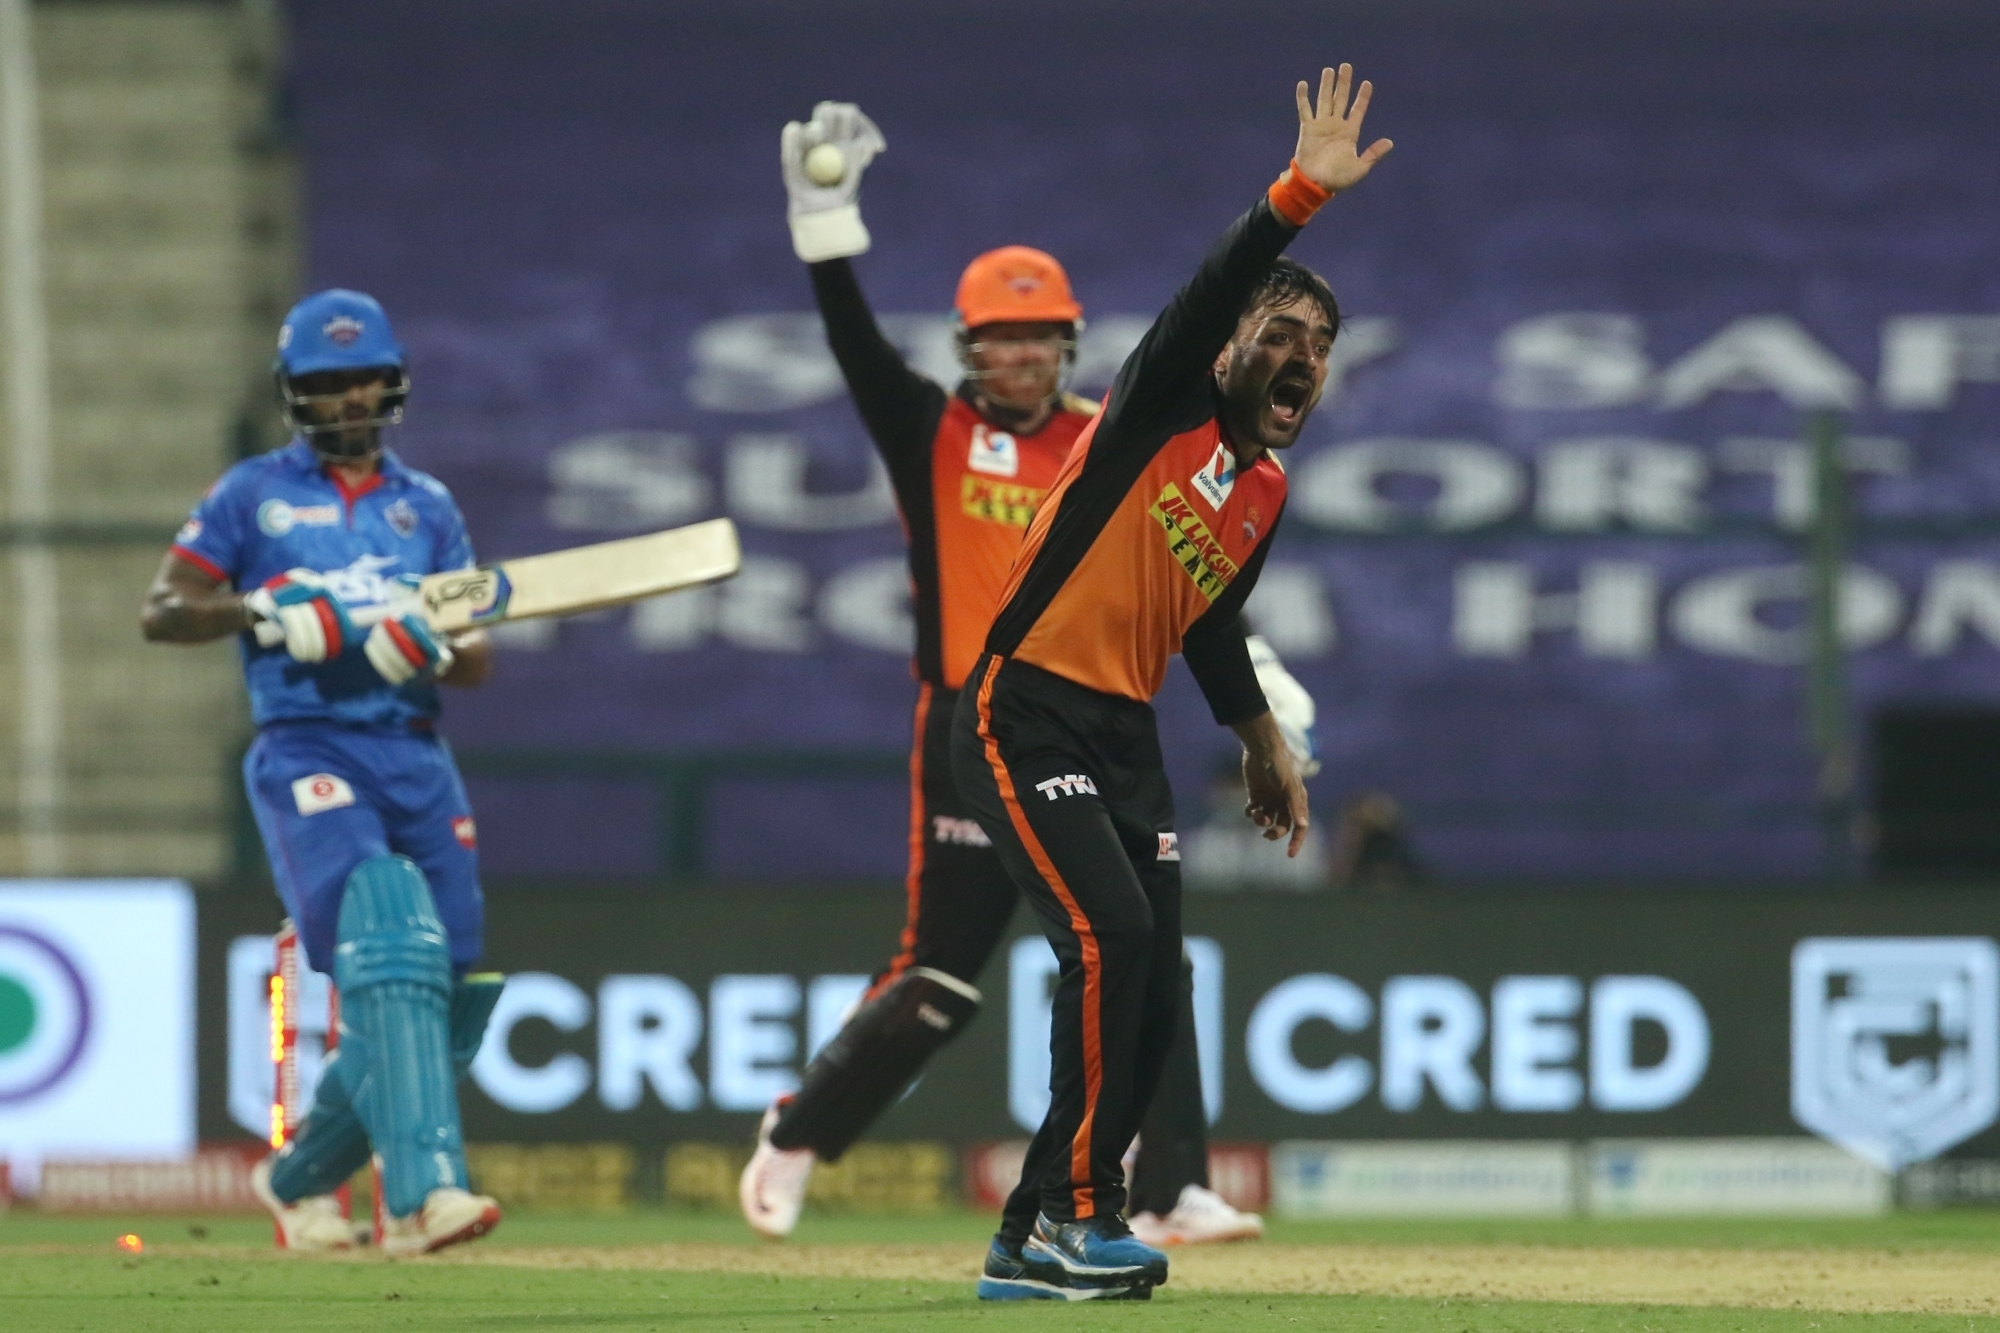 Rashid Khan was outstanding with the ball for SRH | IANS